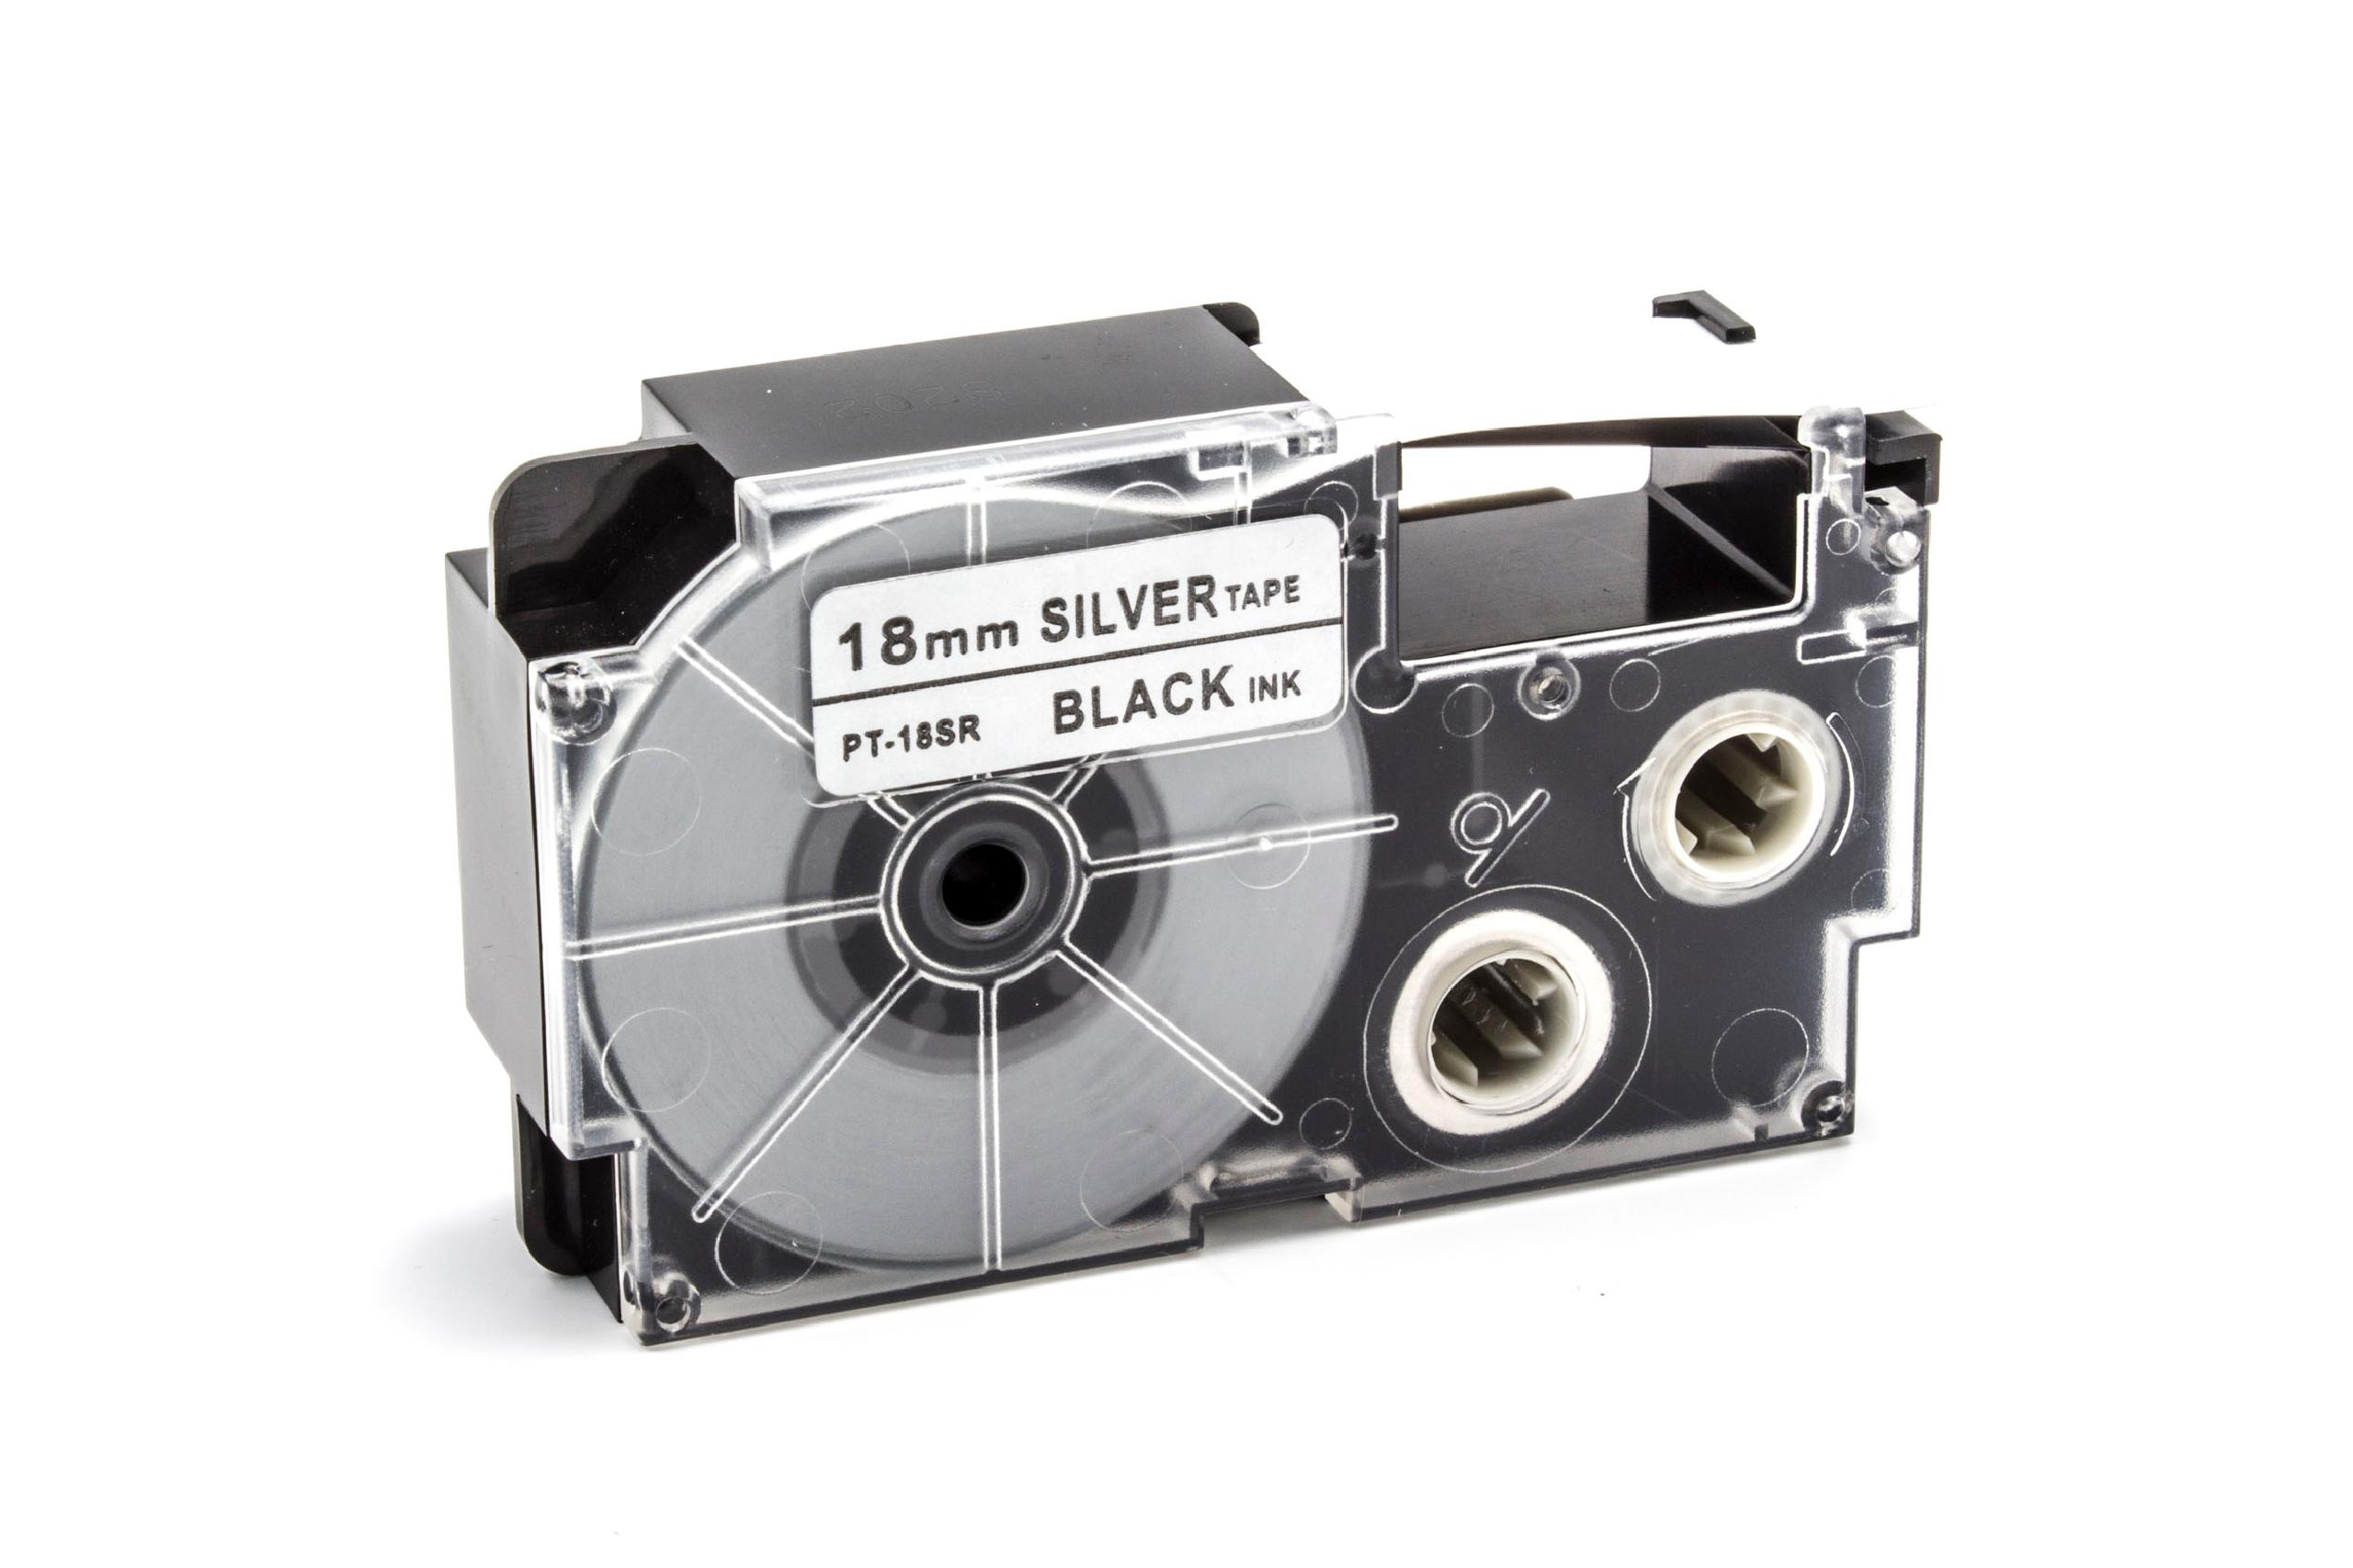 Label Tape as Replacement for Casio XR-18SR1, XR-18SR - 18 mm Black to Silver, pet+ RESIN